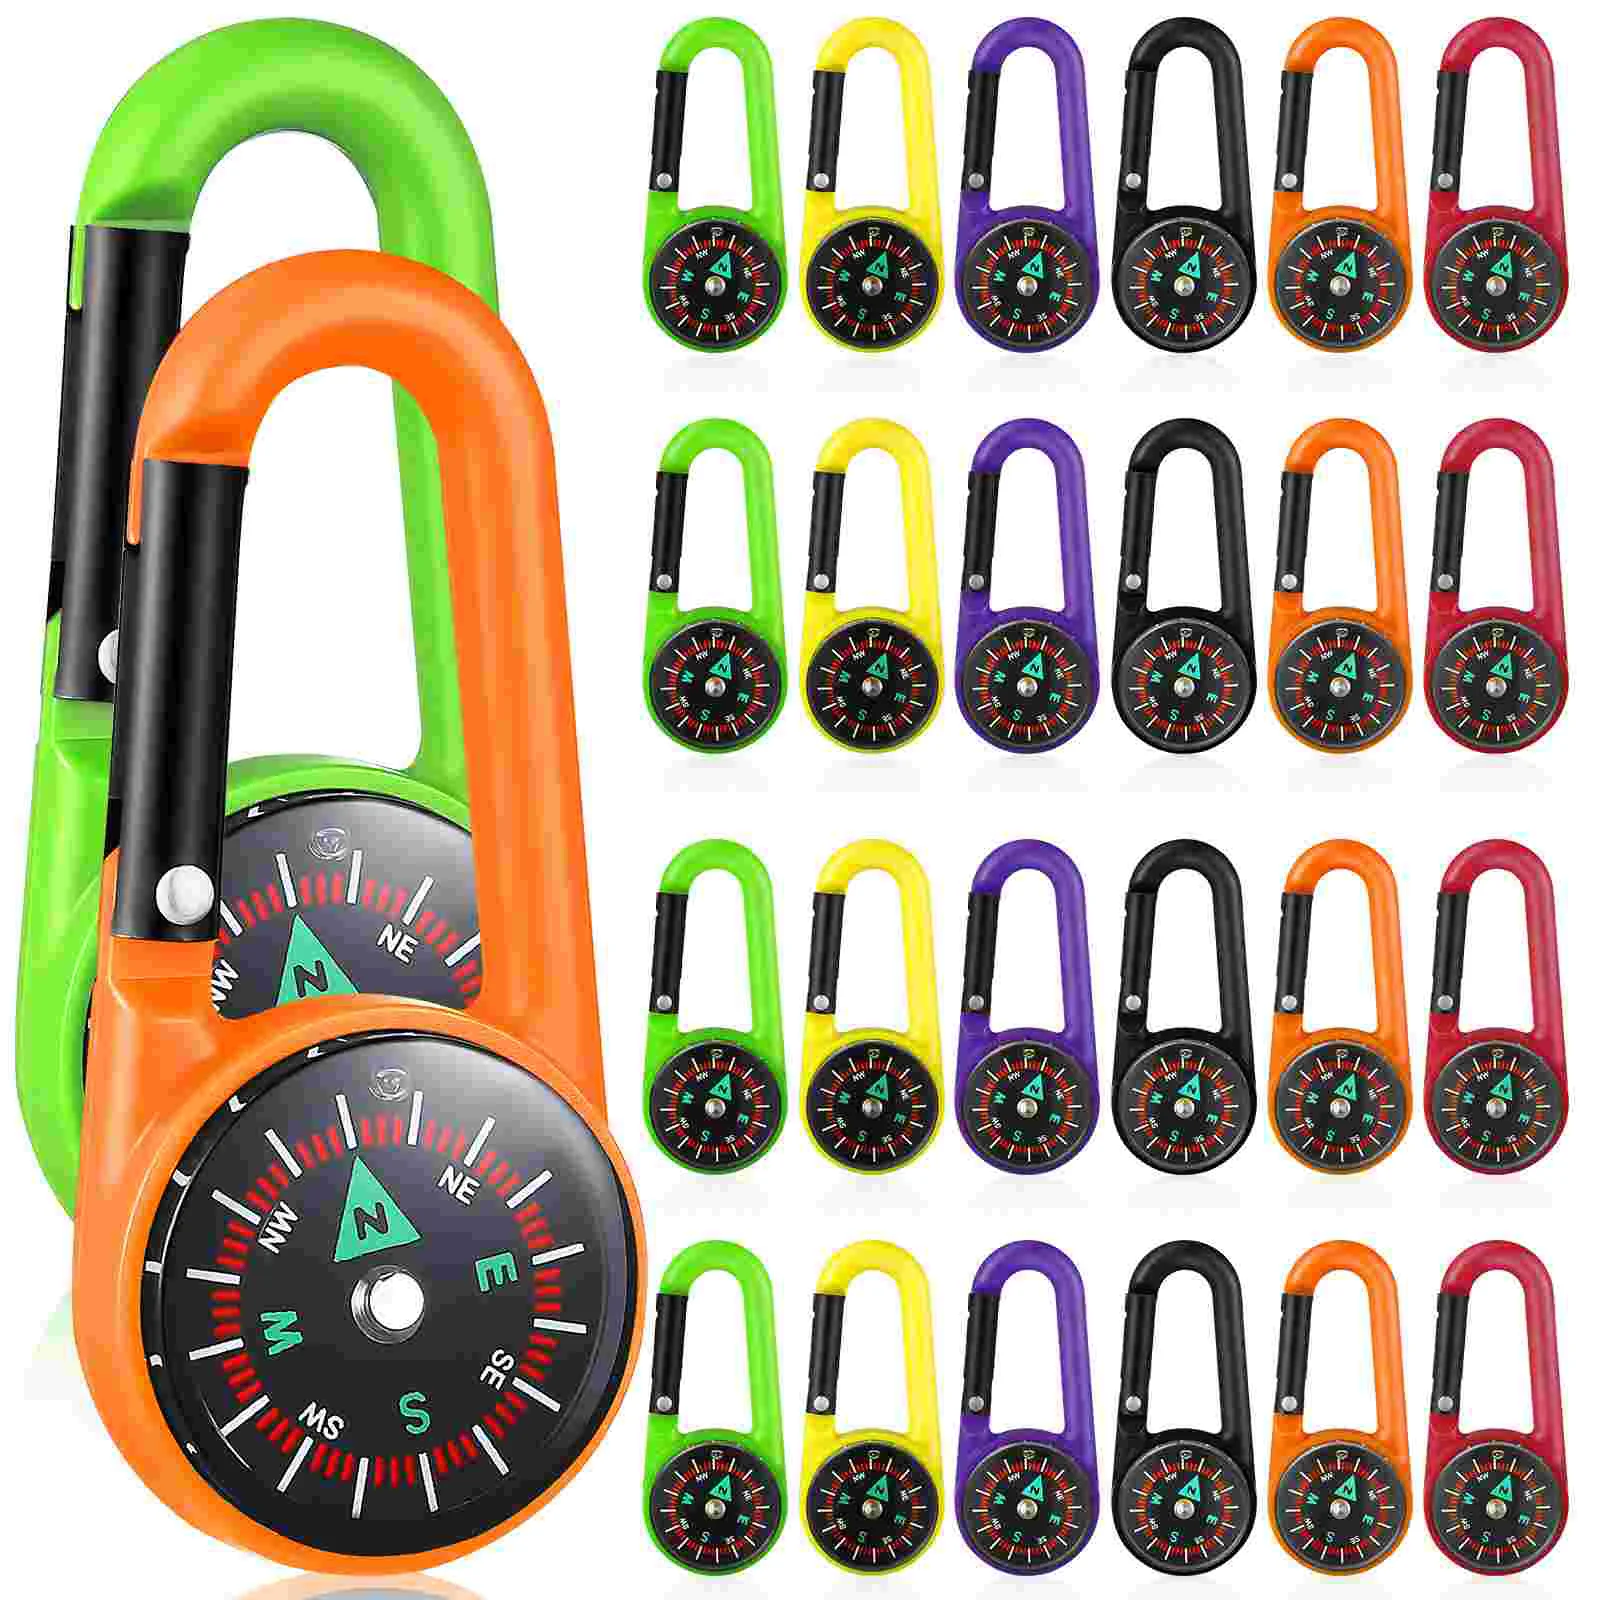 

24 Pcs Climbing Compass Carabiners Outdoor Self Locking Carabiner Keychains for Traveling Hiking